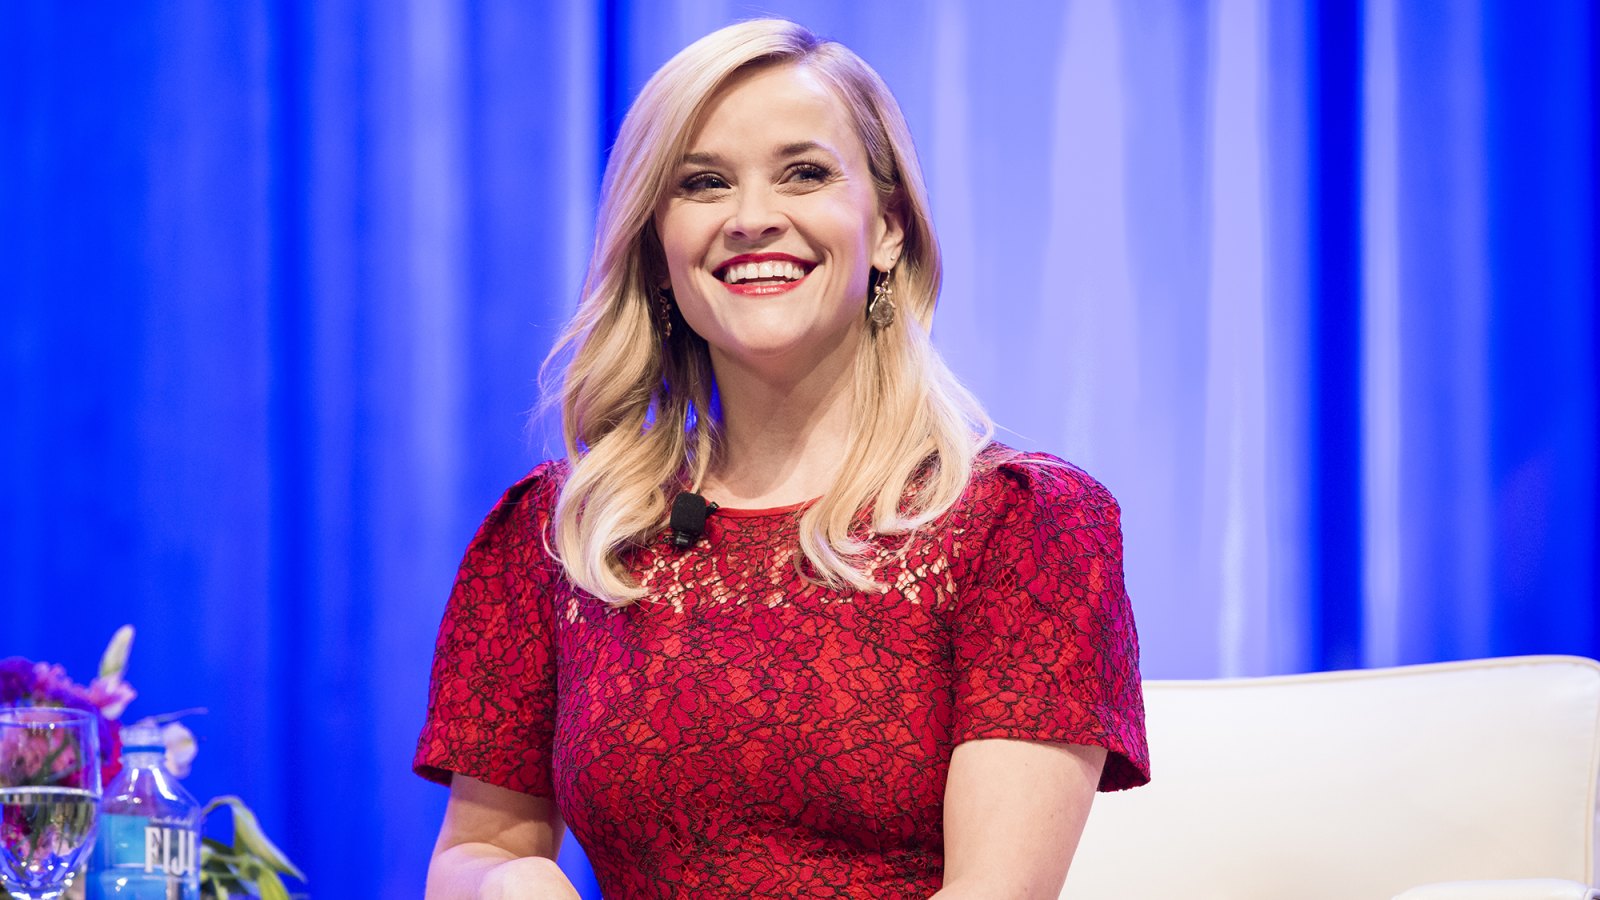 Reese Witherspoon and Her Family Win for Cutest Holiday Photo